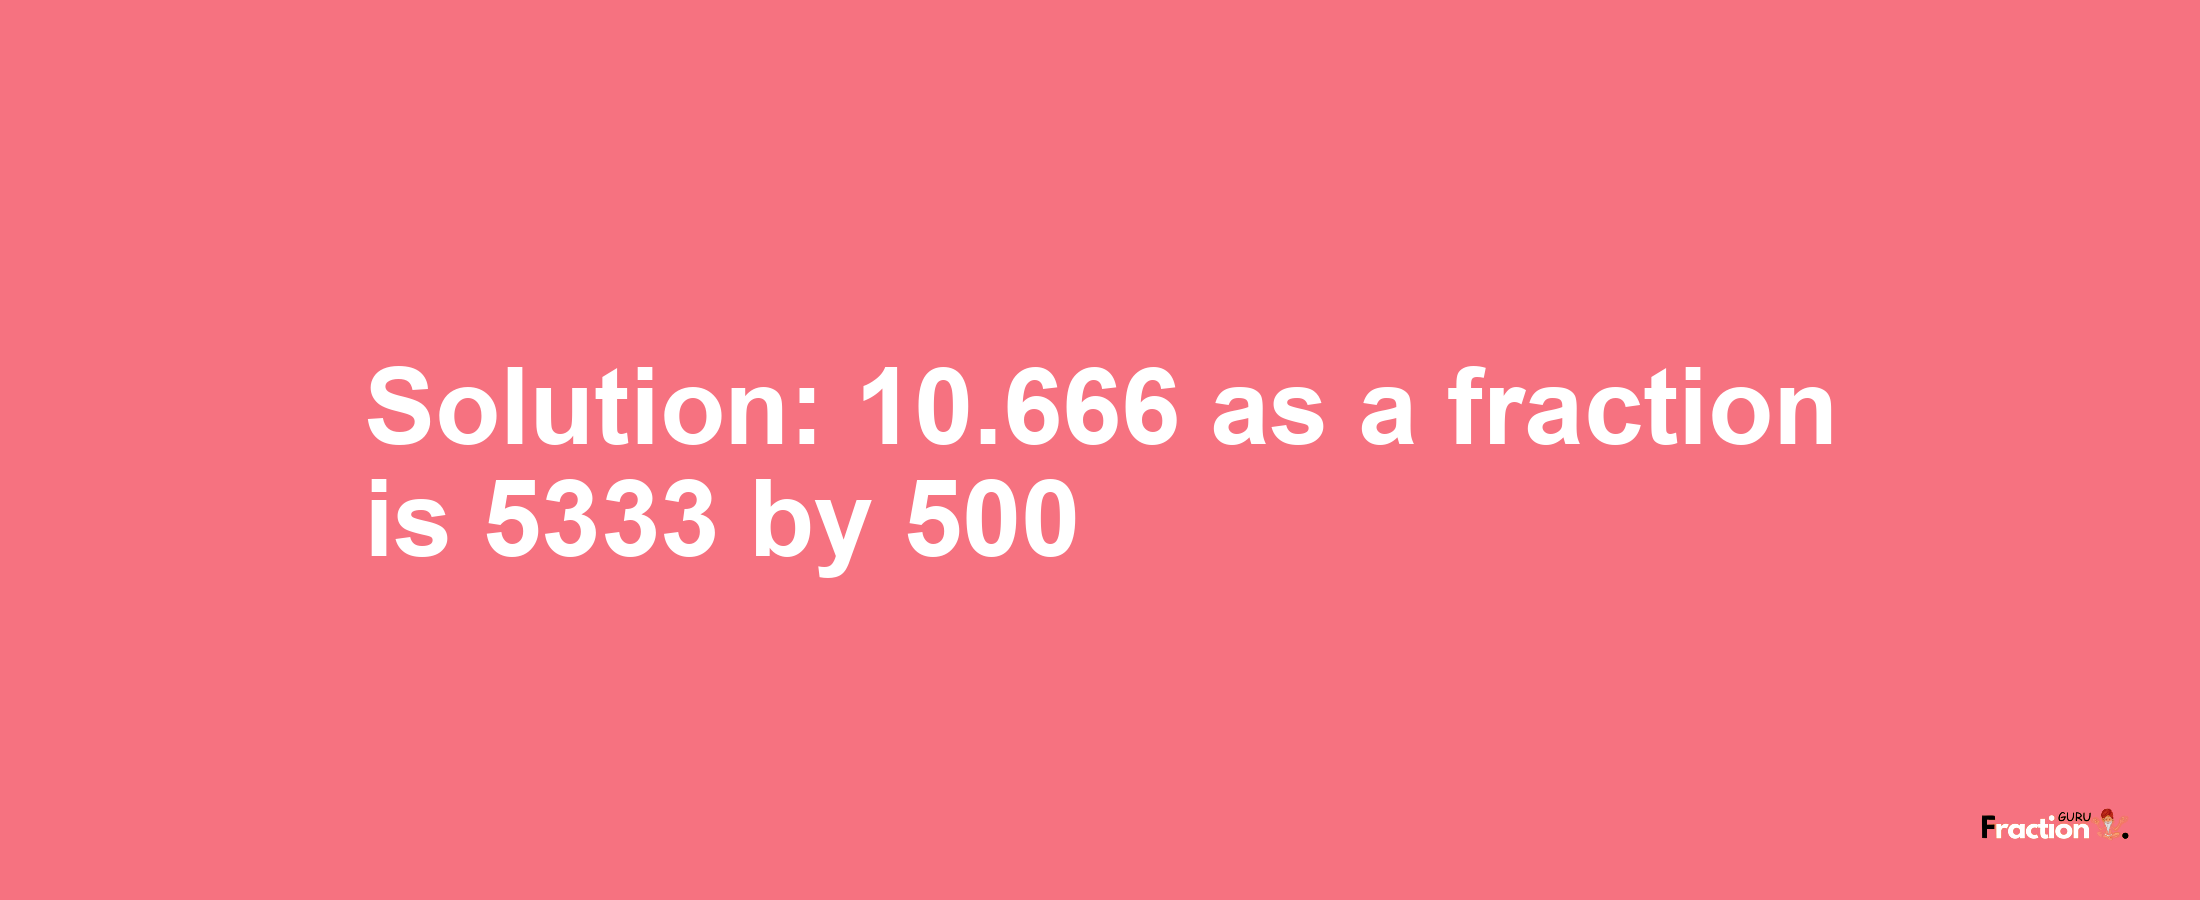 Solution:10.666 as a fraction is 5333/500